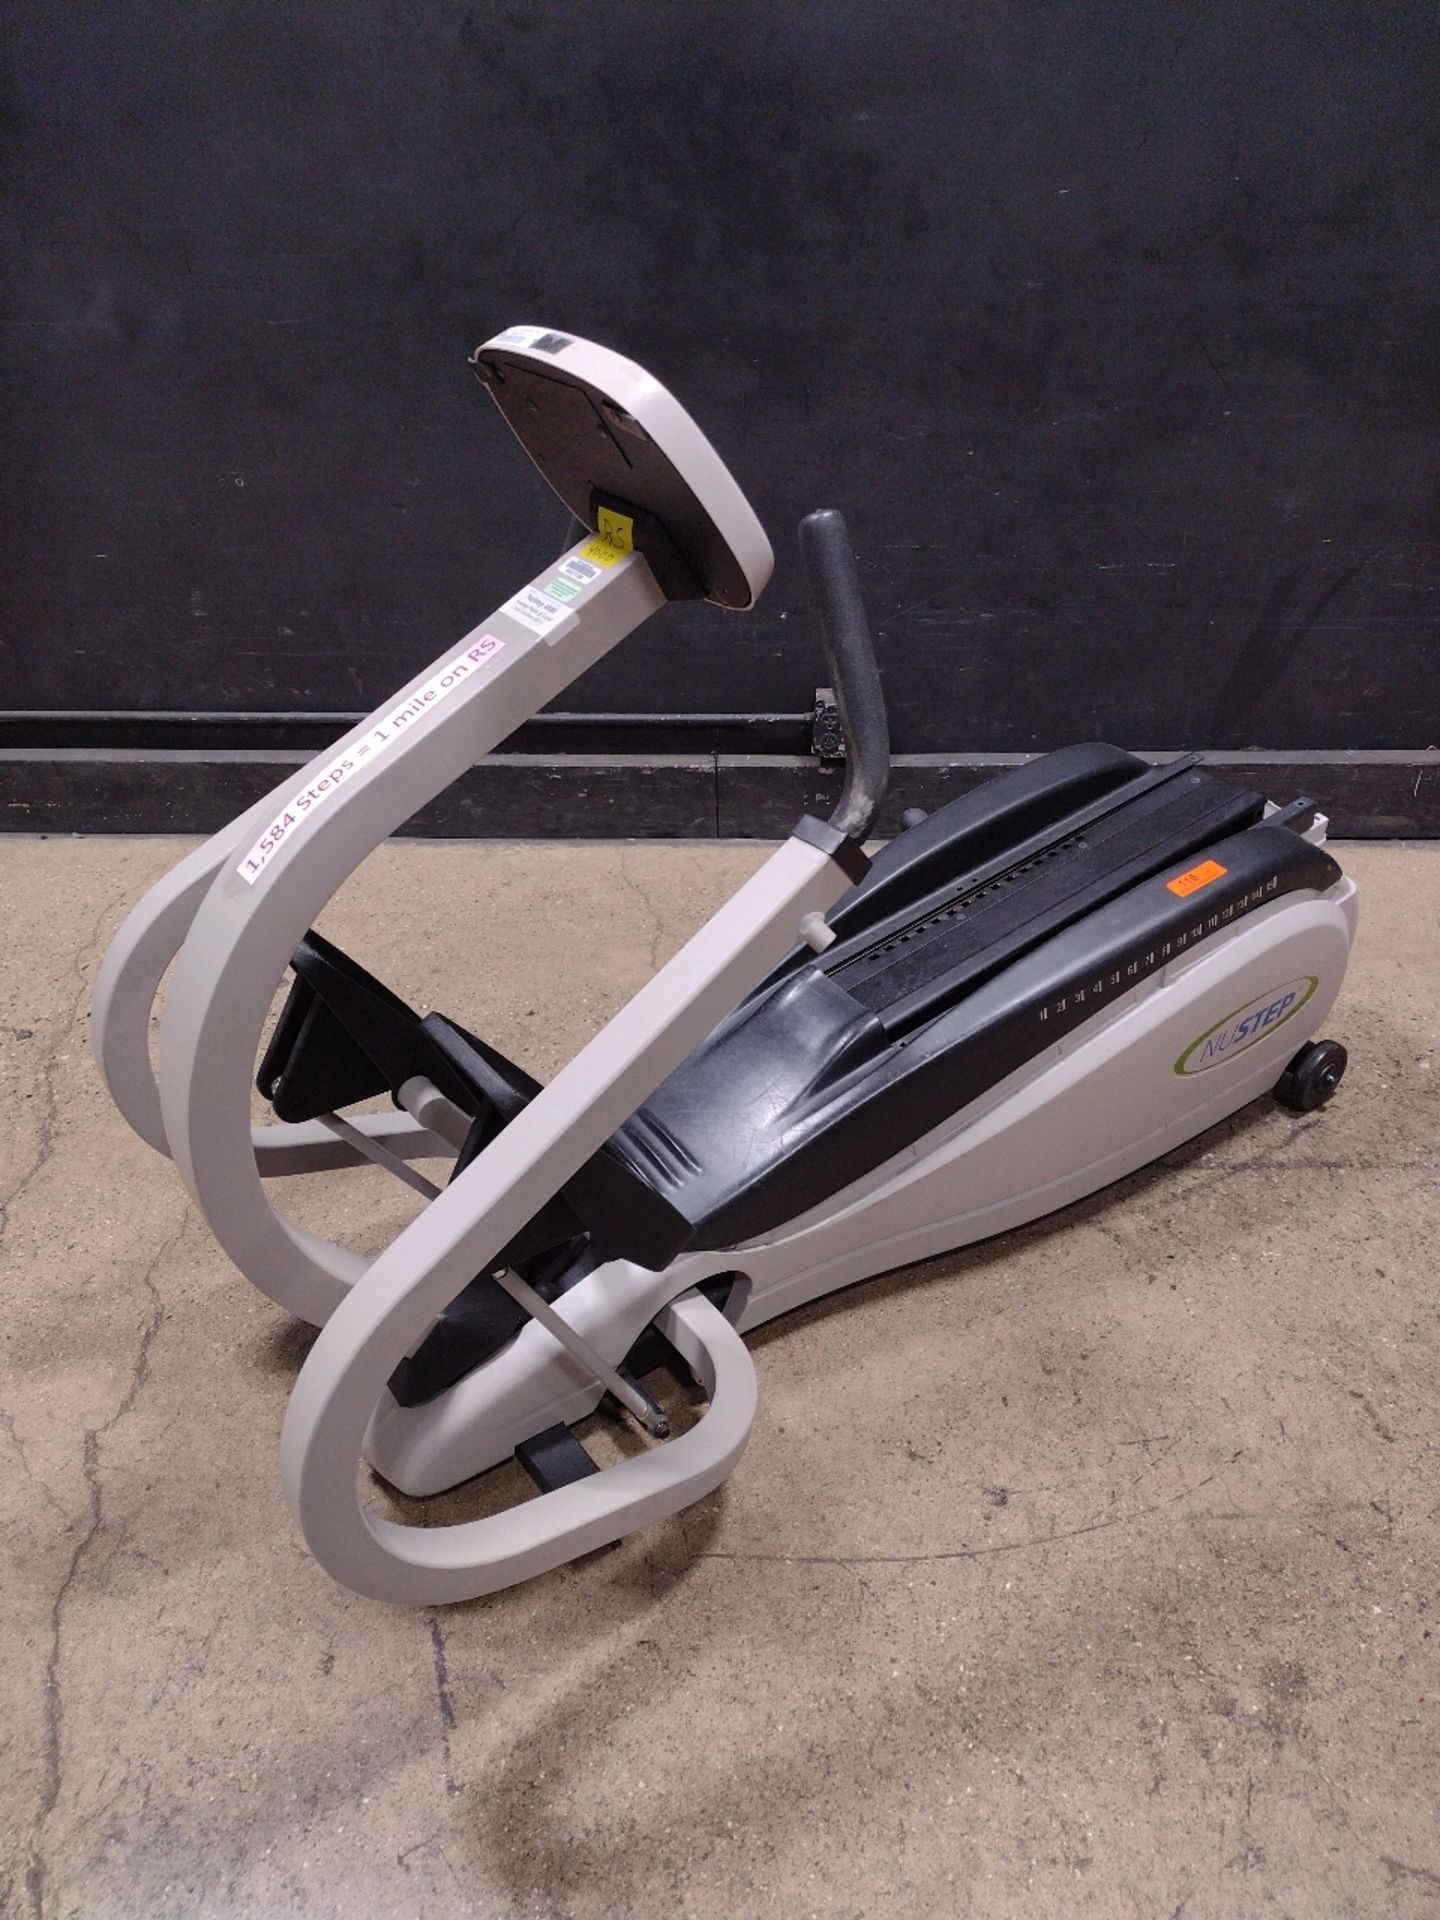 NUSTEP TRS 4000 RECUMBENT STEPPER (LOCATED AT 3325 MOUNT PROSPECT ROAD, FRANKLIN PARK, IL, 60131)